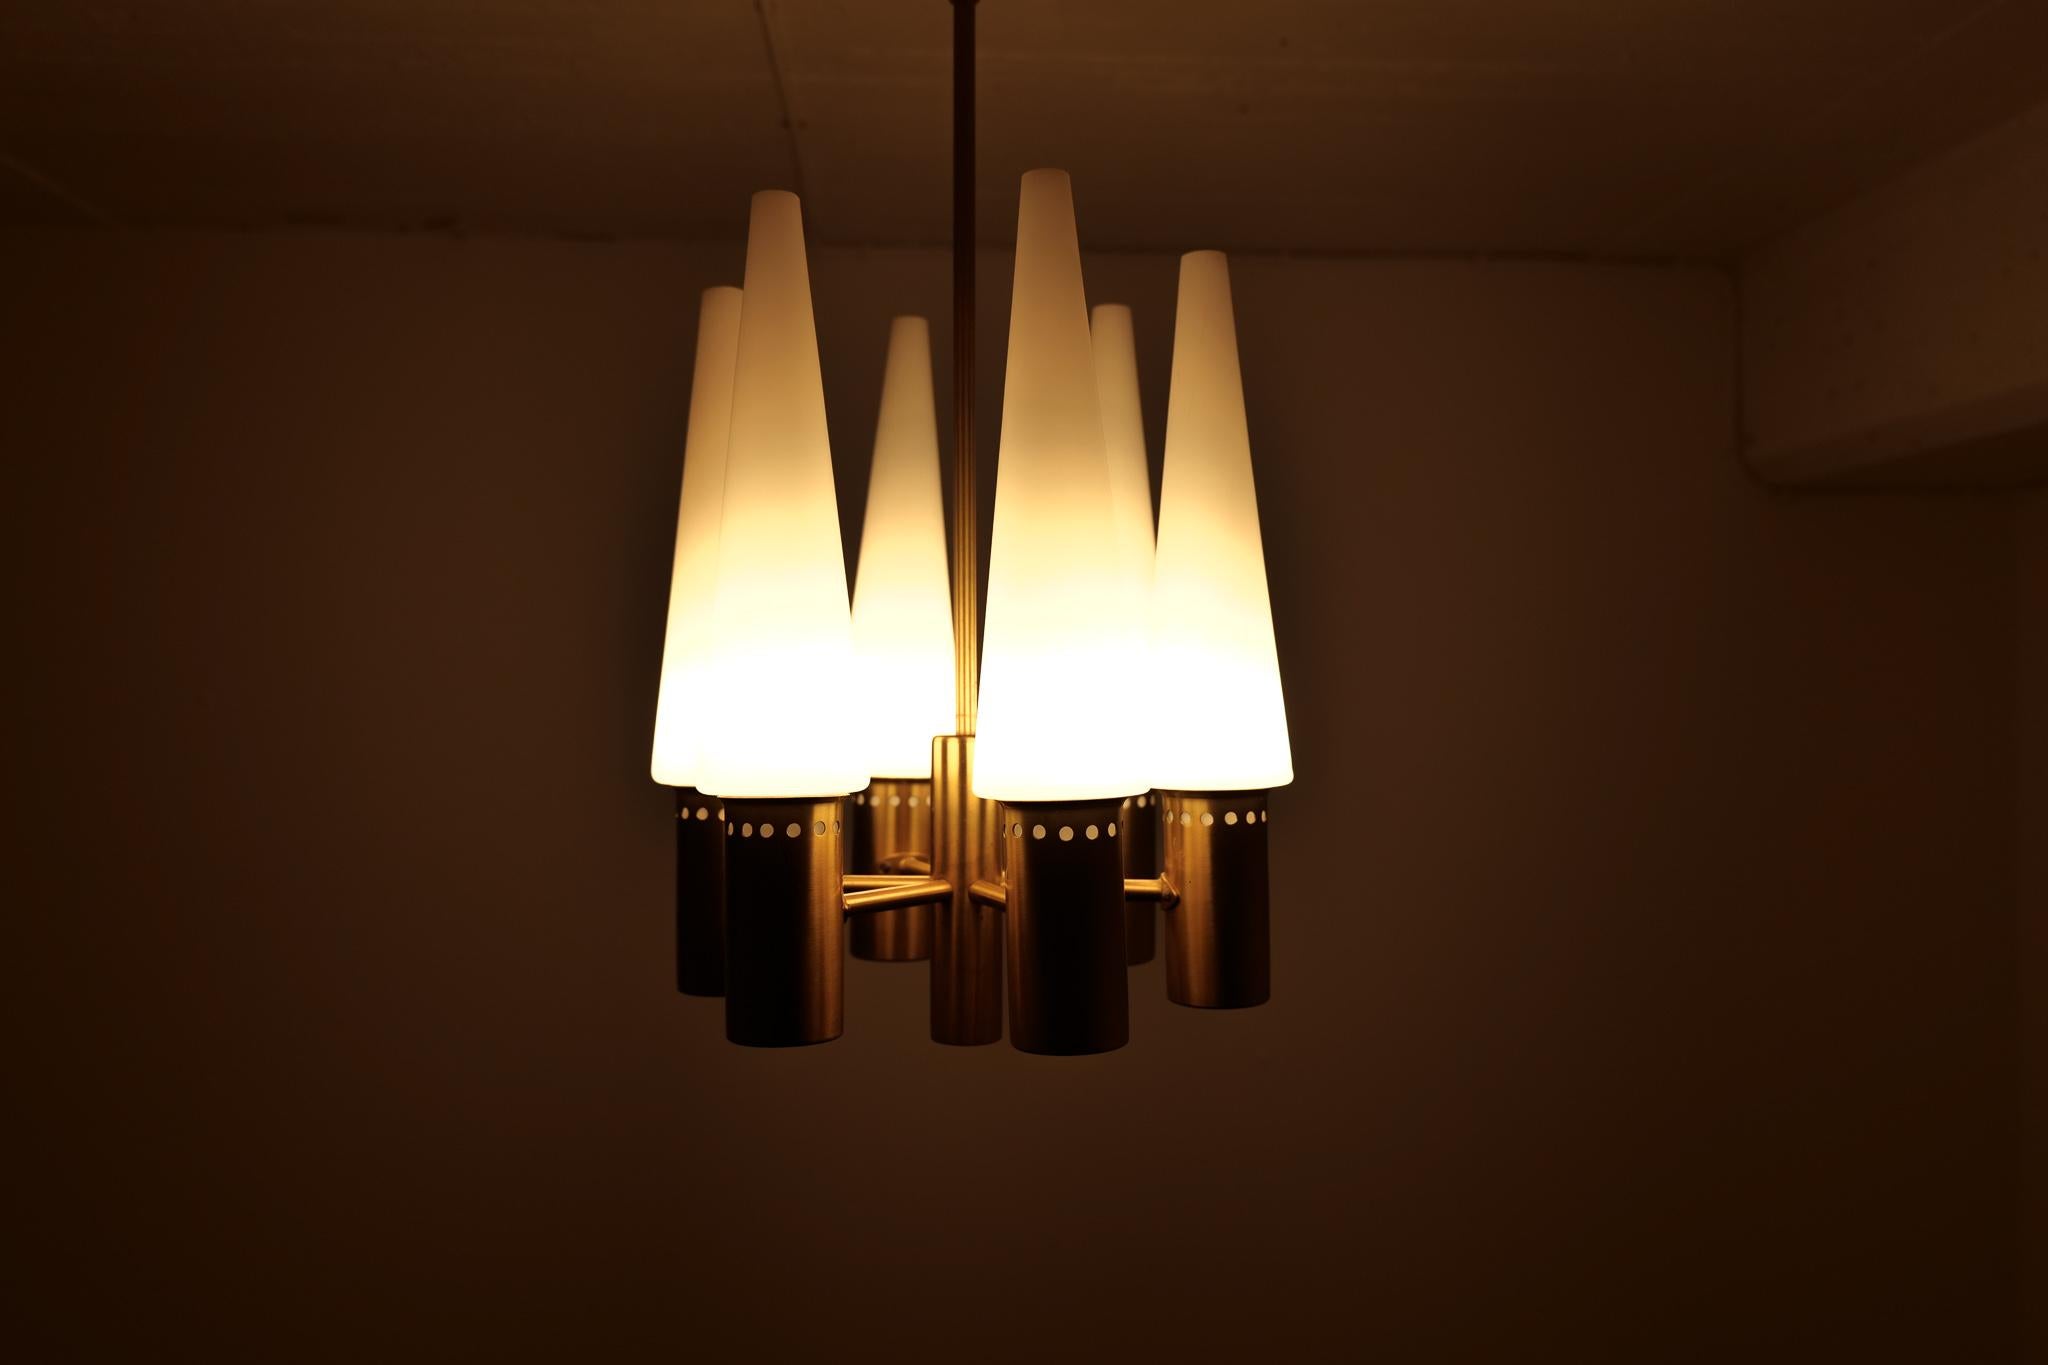 Swedish Midcentury Hans-Agne Jakobsson Brass and Opaline Ceiling Lamp, Sweden, 1950s For Sale